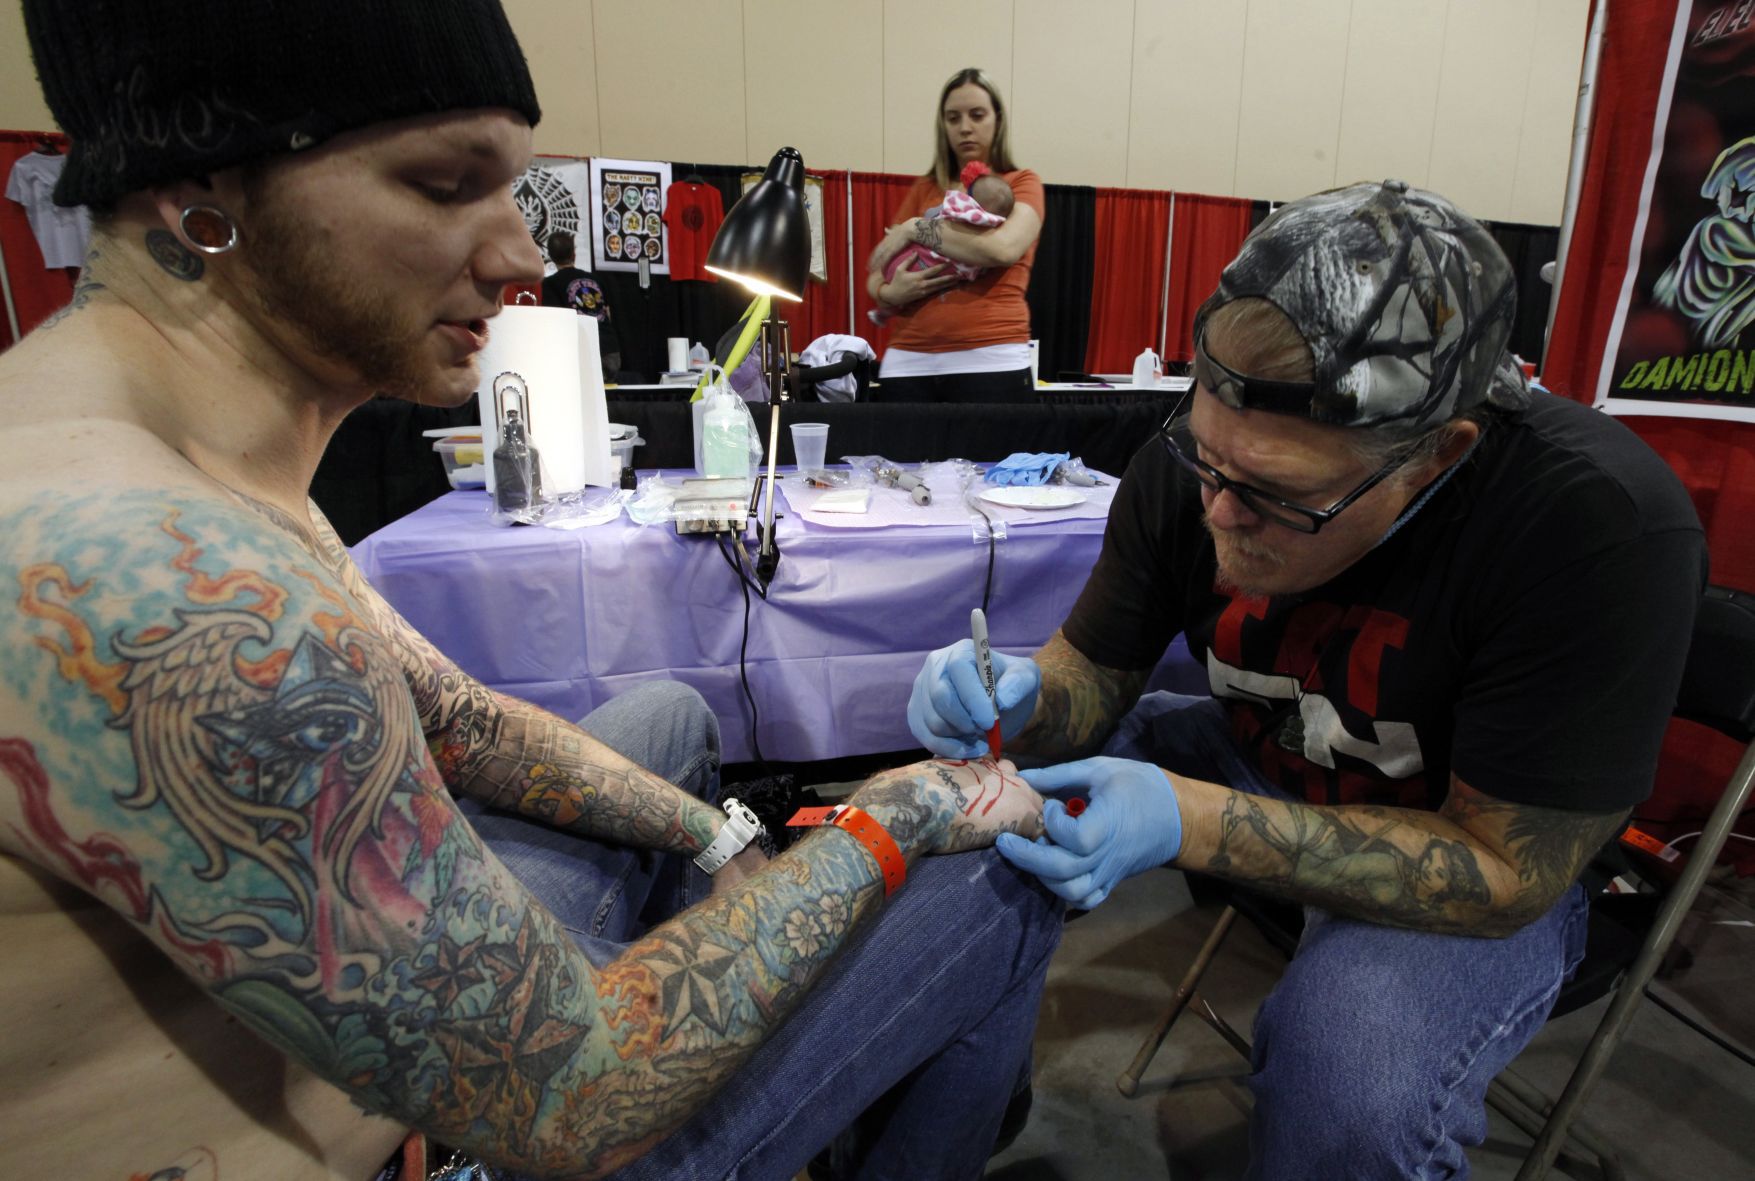 VIDEO Calgarys Tattoo and Arts festival hits record number of artists   Calgary Journal